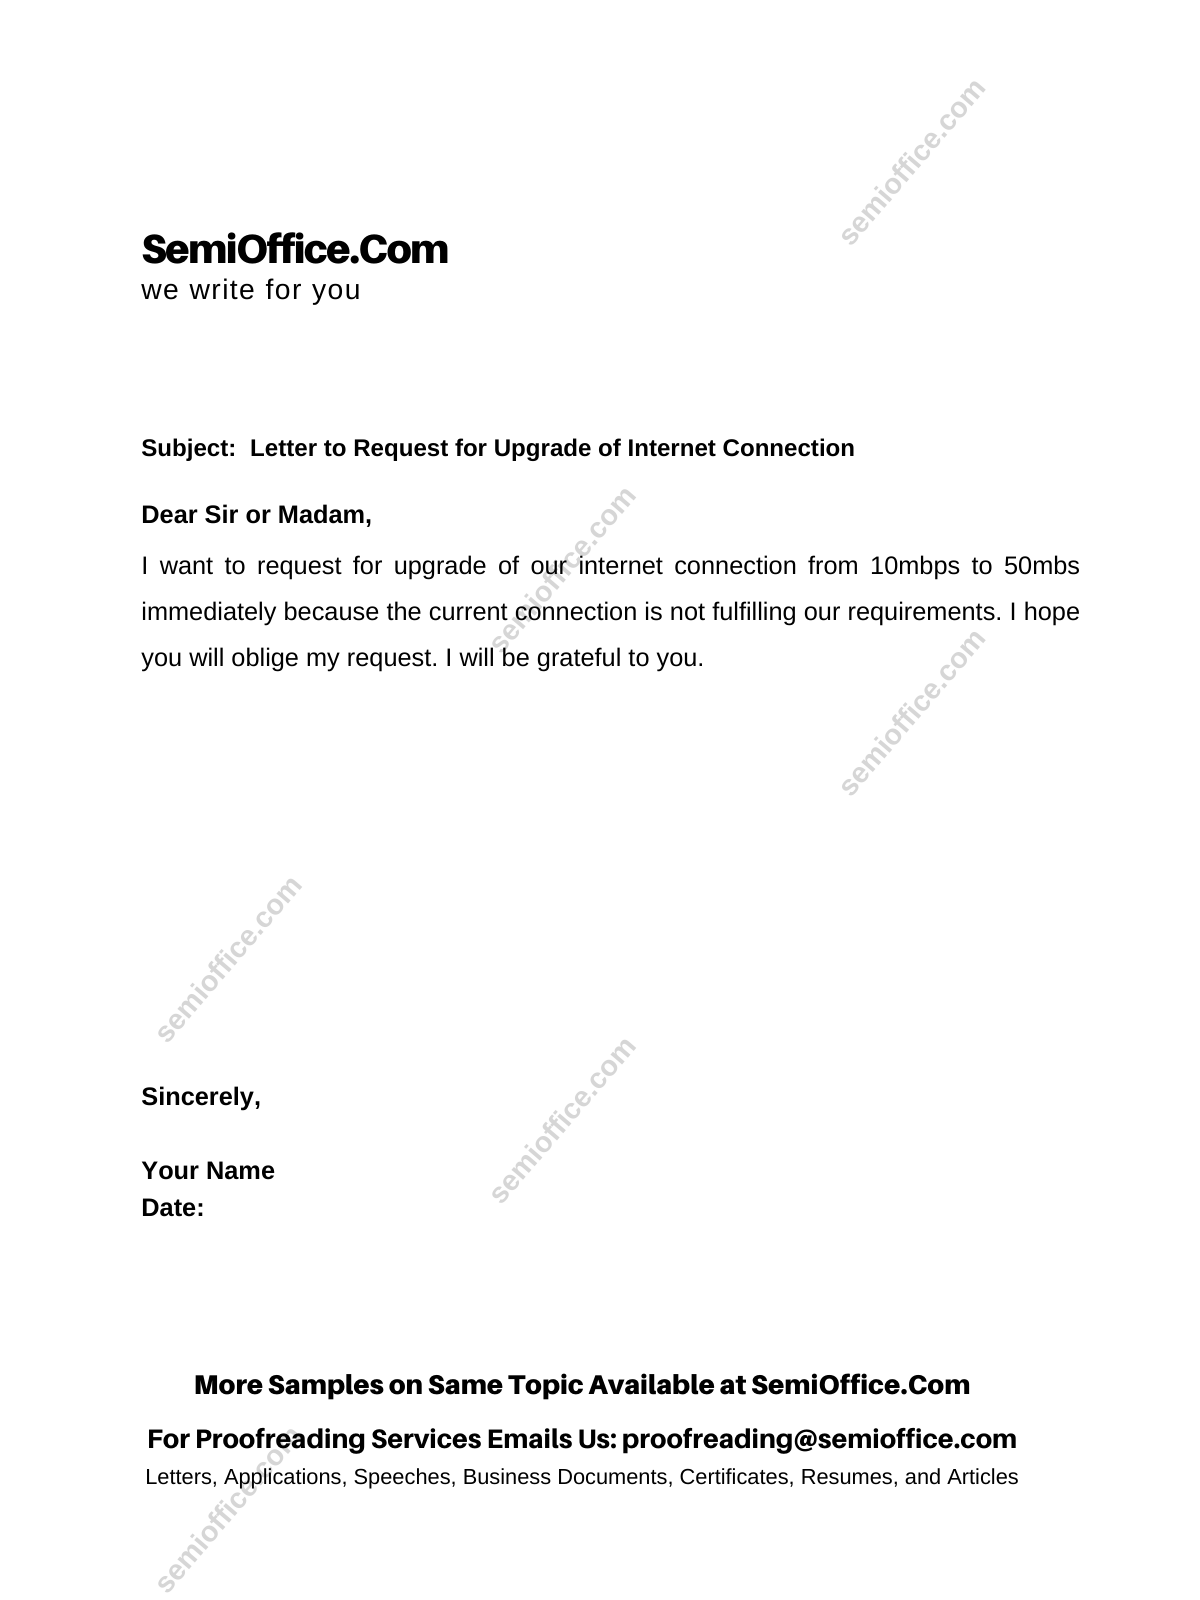 sample-request-letter-upgrade-internet-connection-semioffice-com